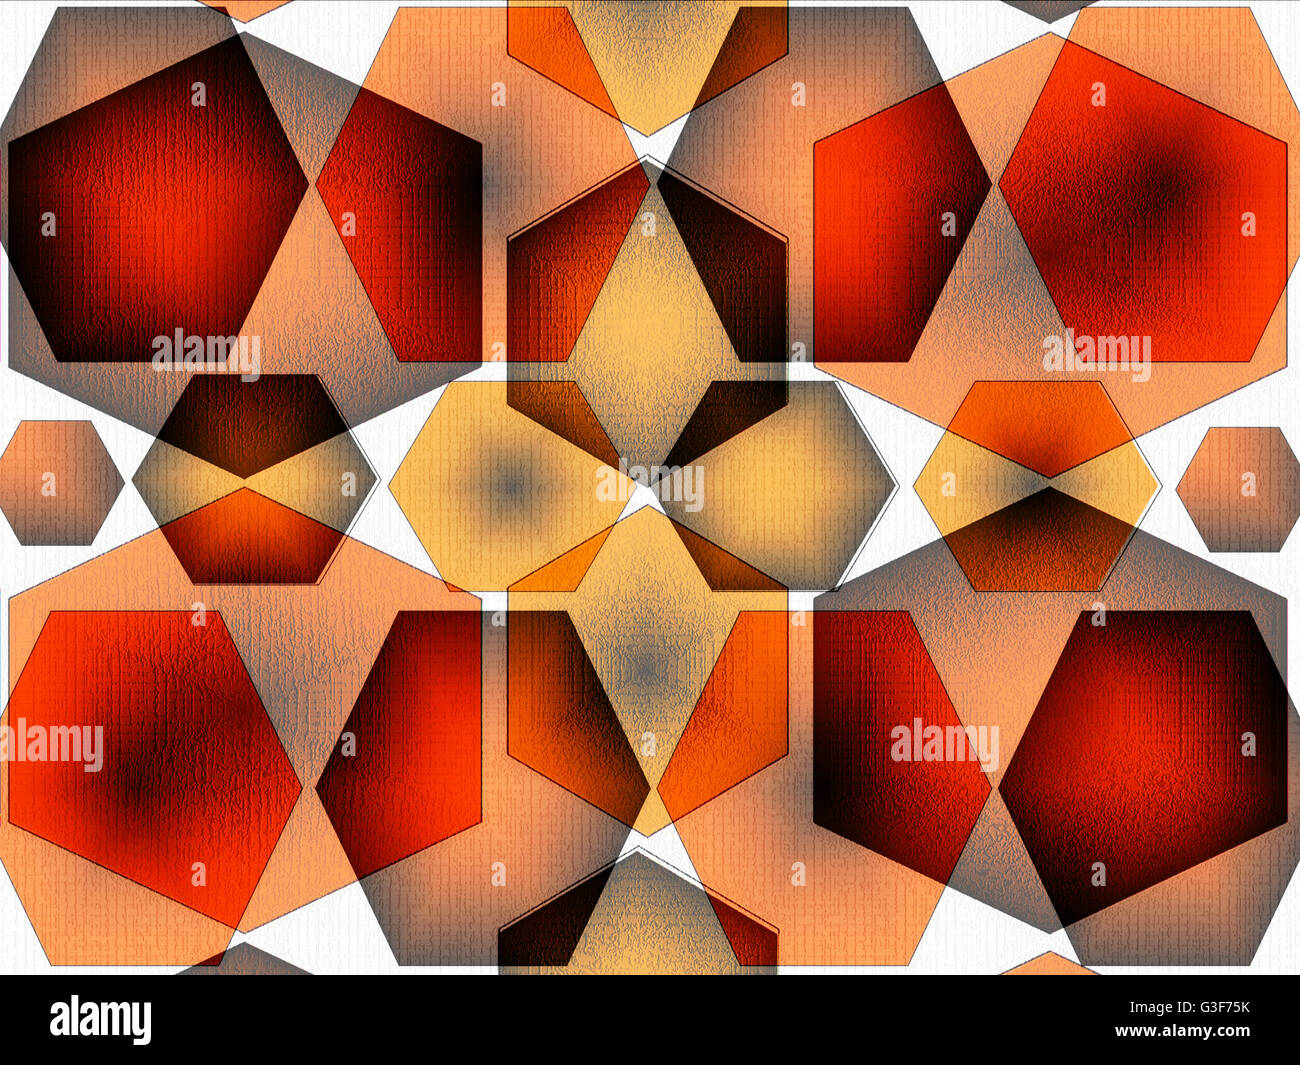 Stunning  unique  colorful   modern  geometric abstract design superimposed  with   rectangular motifs on a  plain background ideal for wallpapers  . Stock Photo